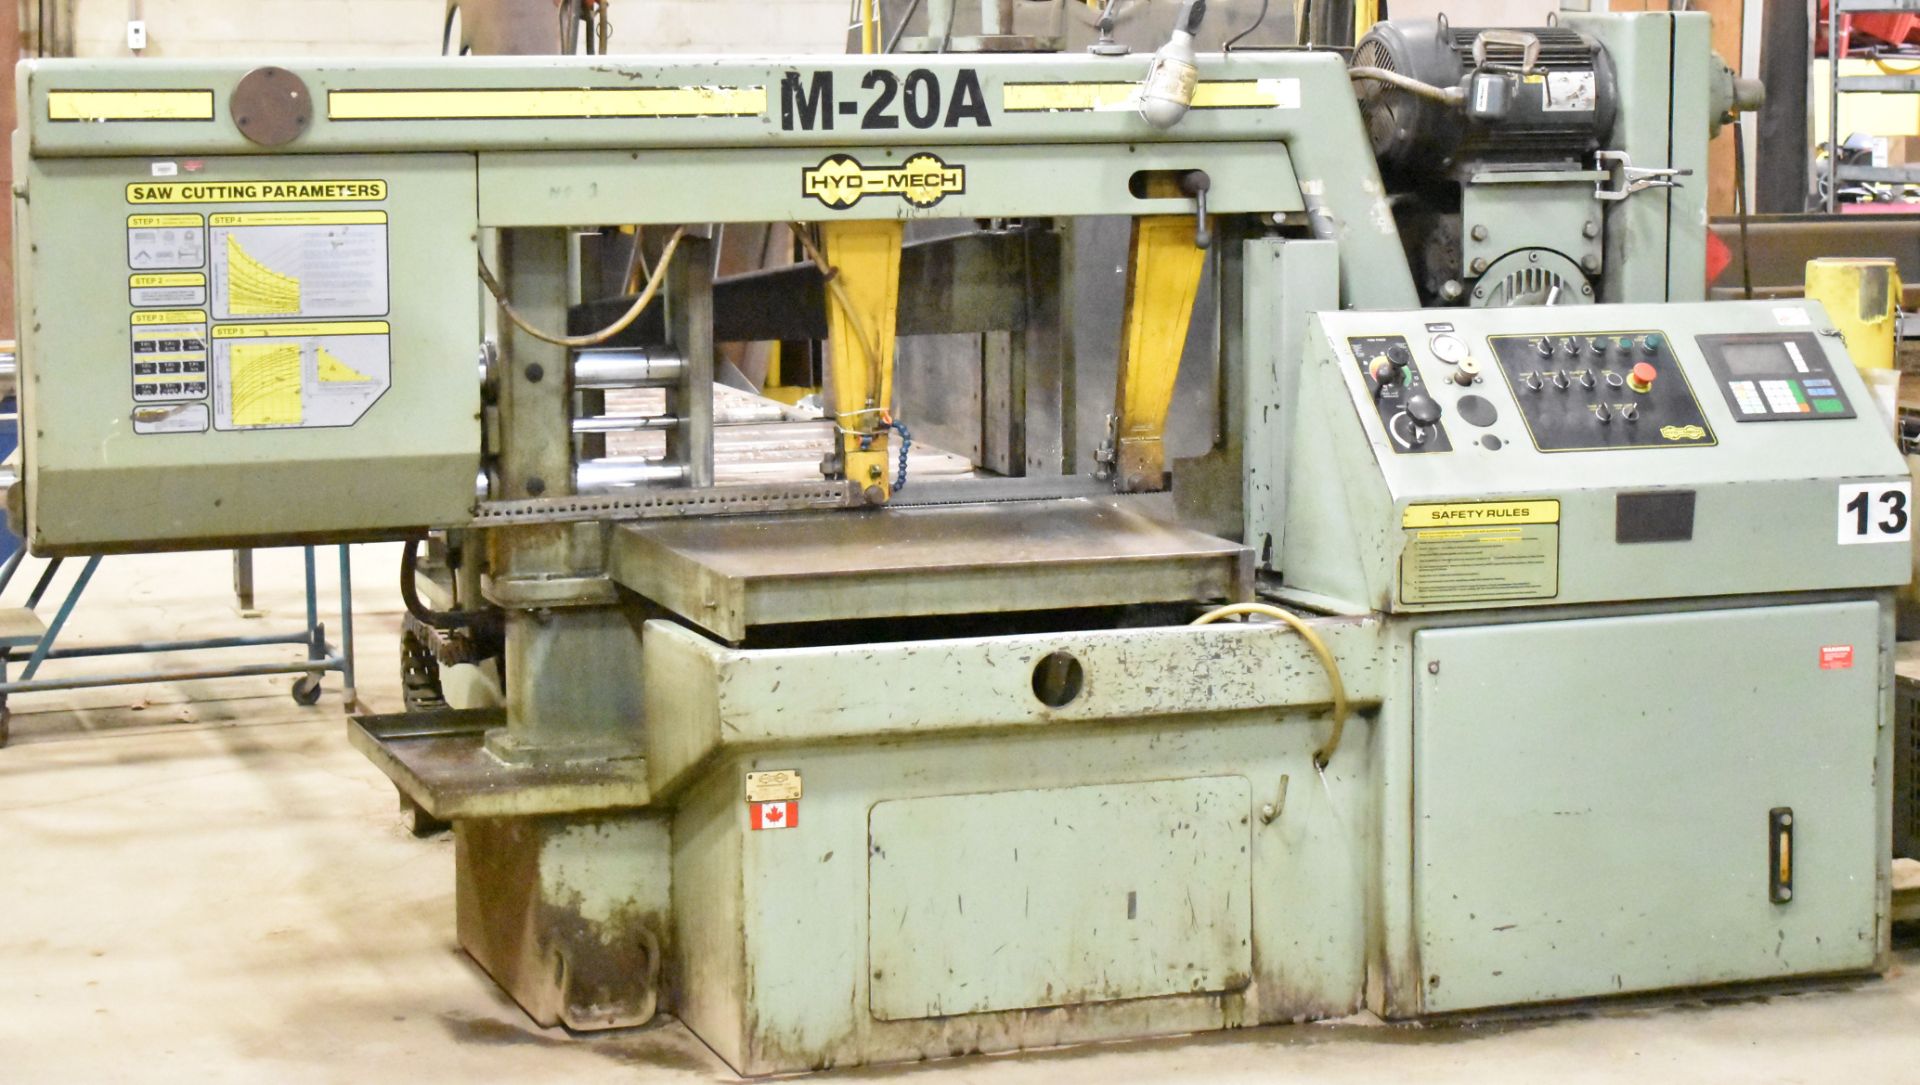 HYD-MECH (1998) M-20A AUTOMATIC HORIZONTAL BAND SAW WITH PLC CONTROL, 30"X20" CAPACITY, 10 HP,